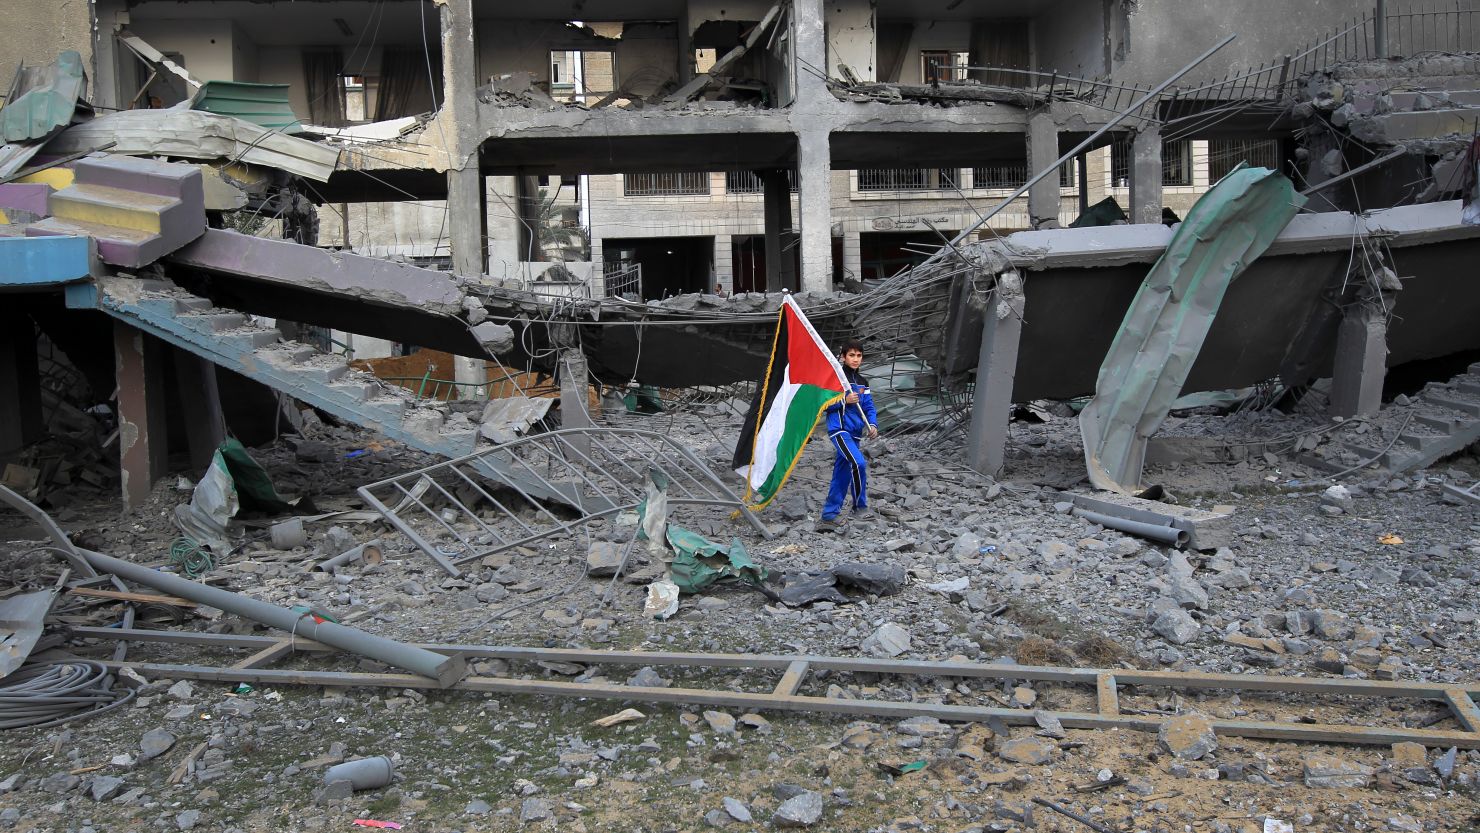 A Palestinian boy carries the national flag as he makes his way through the debris of the destroyed Palestine Stadium.